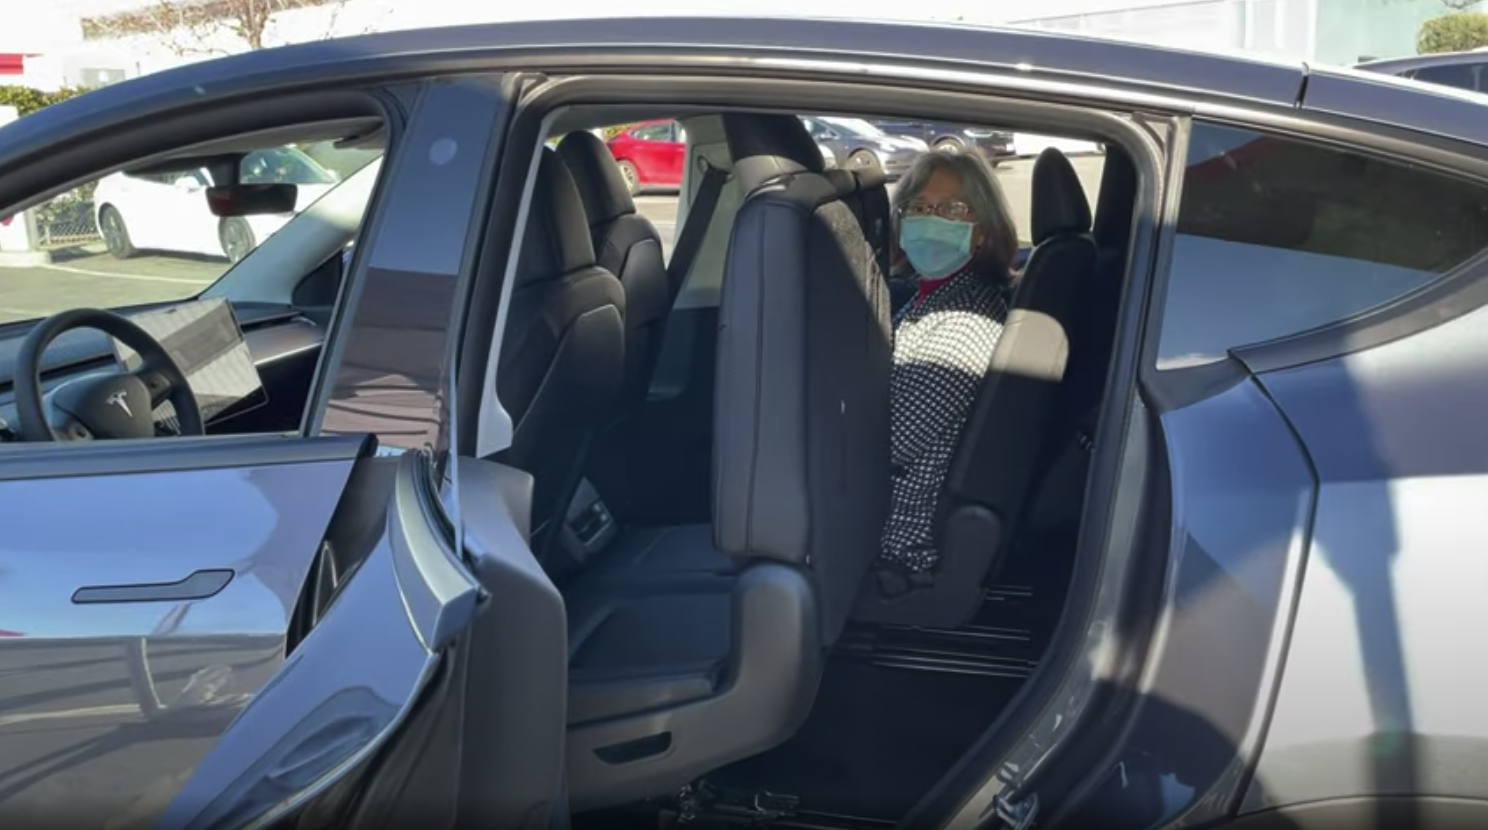 Video shows off access to third row in 7seat Tesla Model Y Drive Tesla